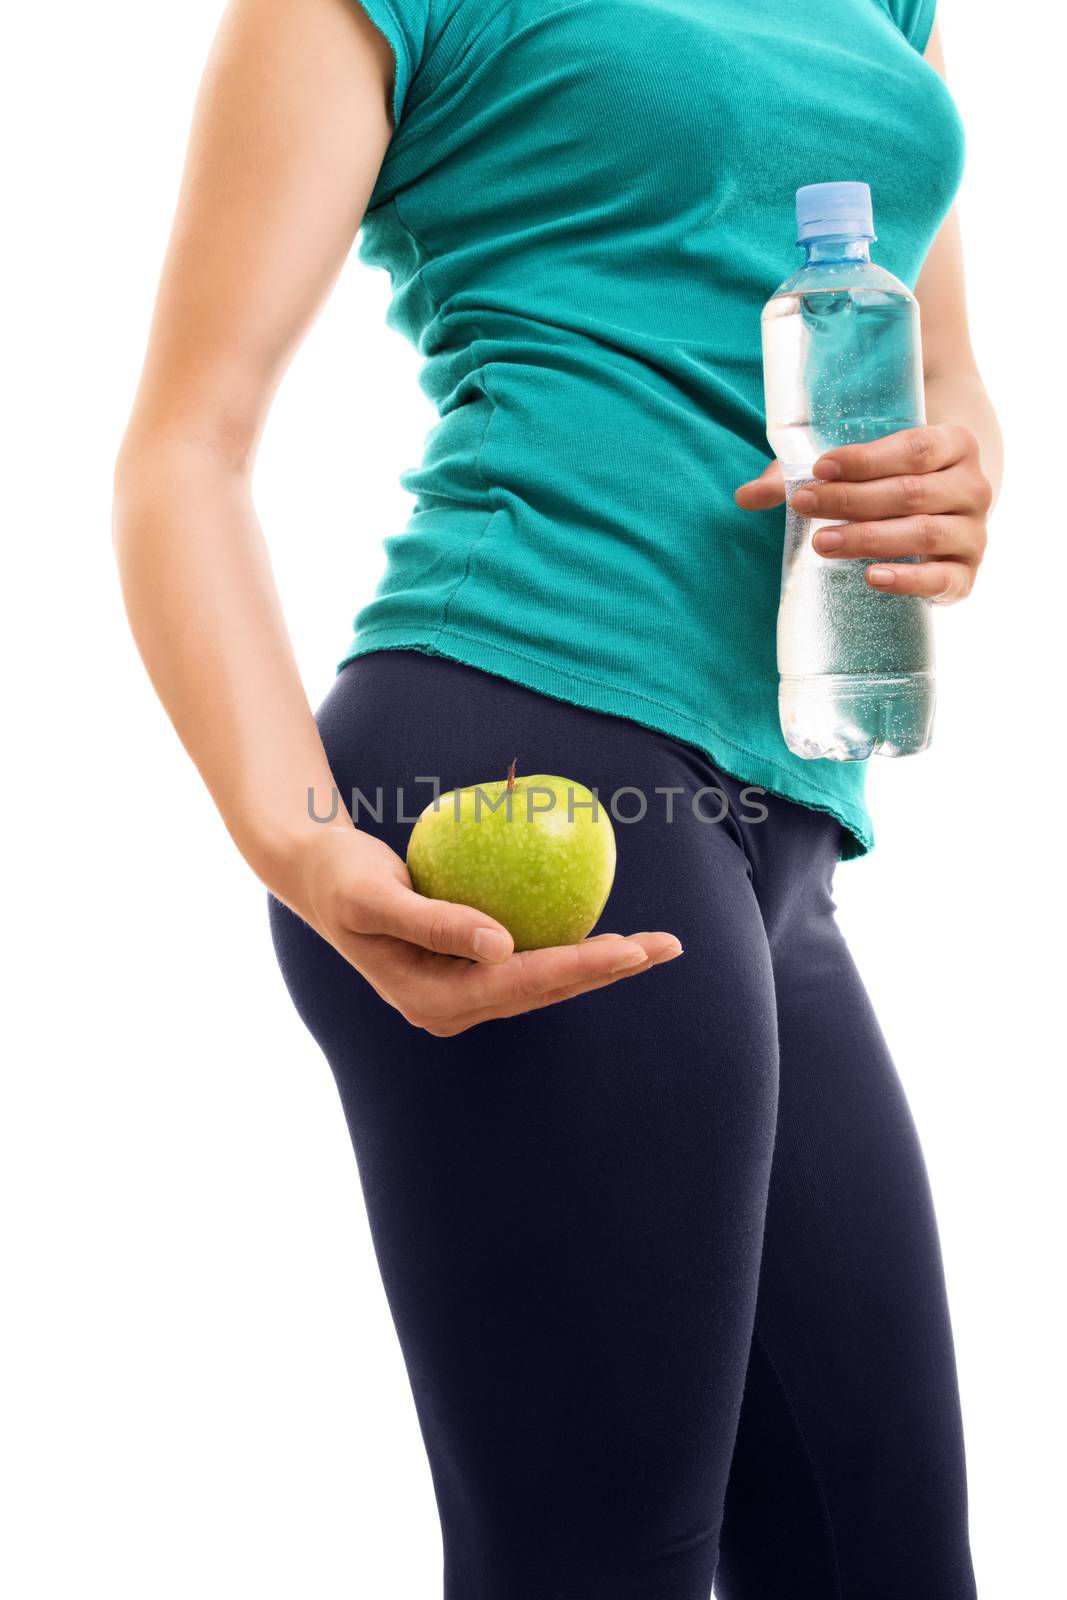 Young girl holding an apple and a bottle of water by Mendelex